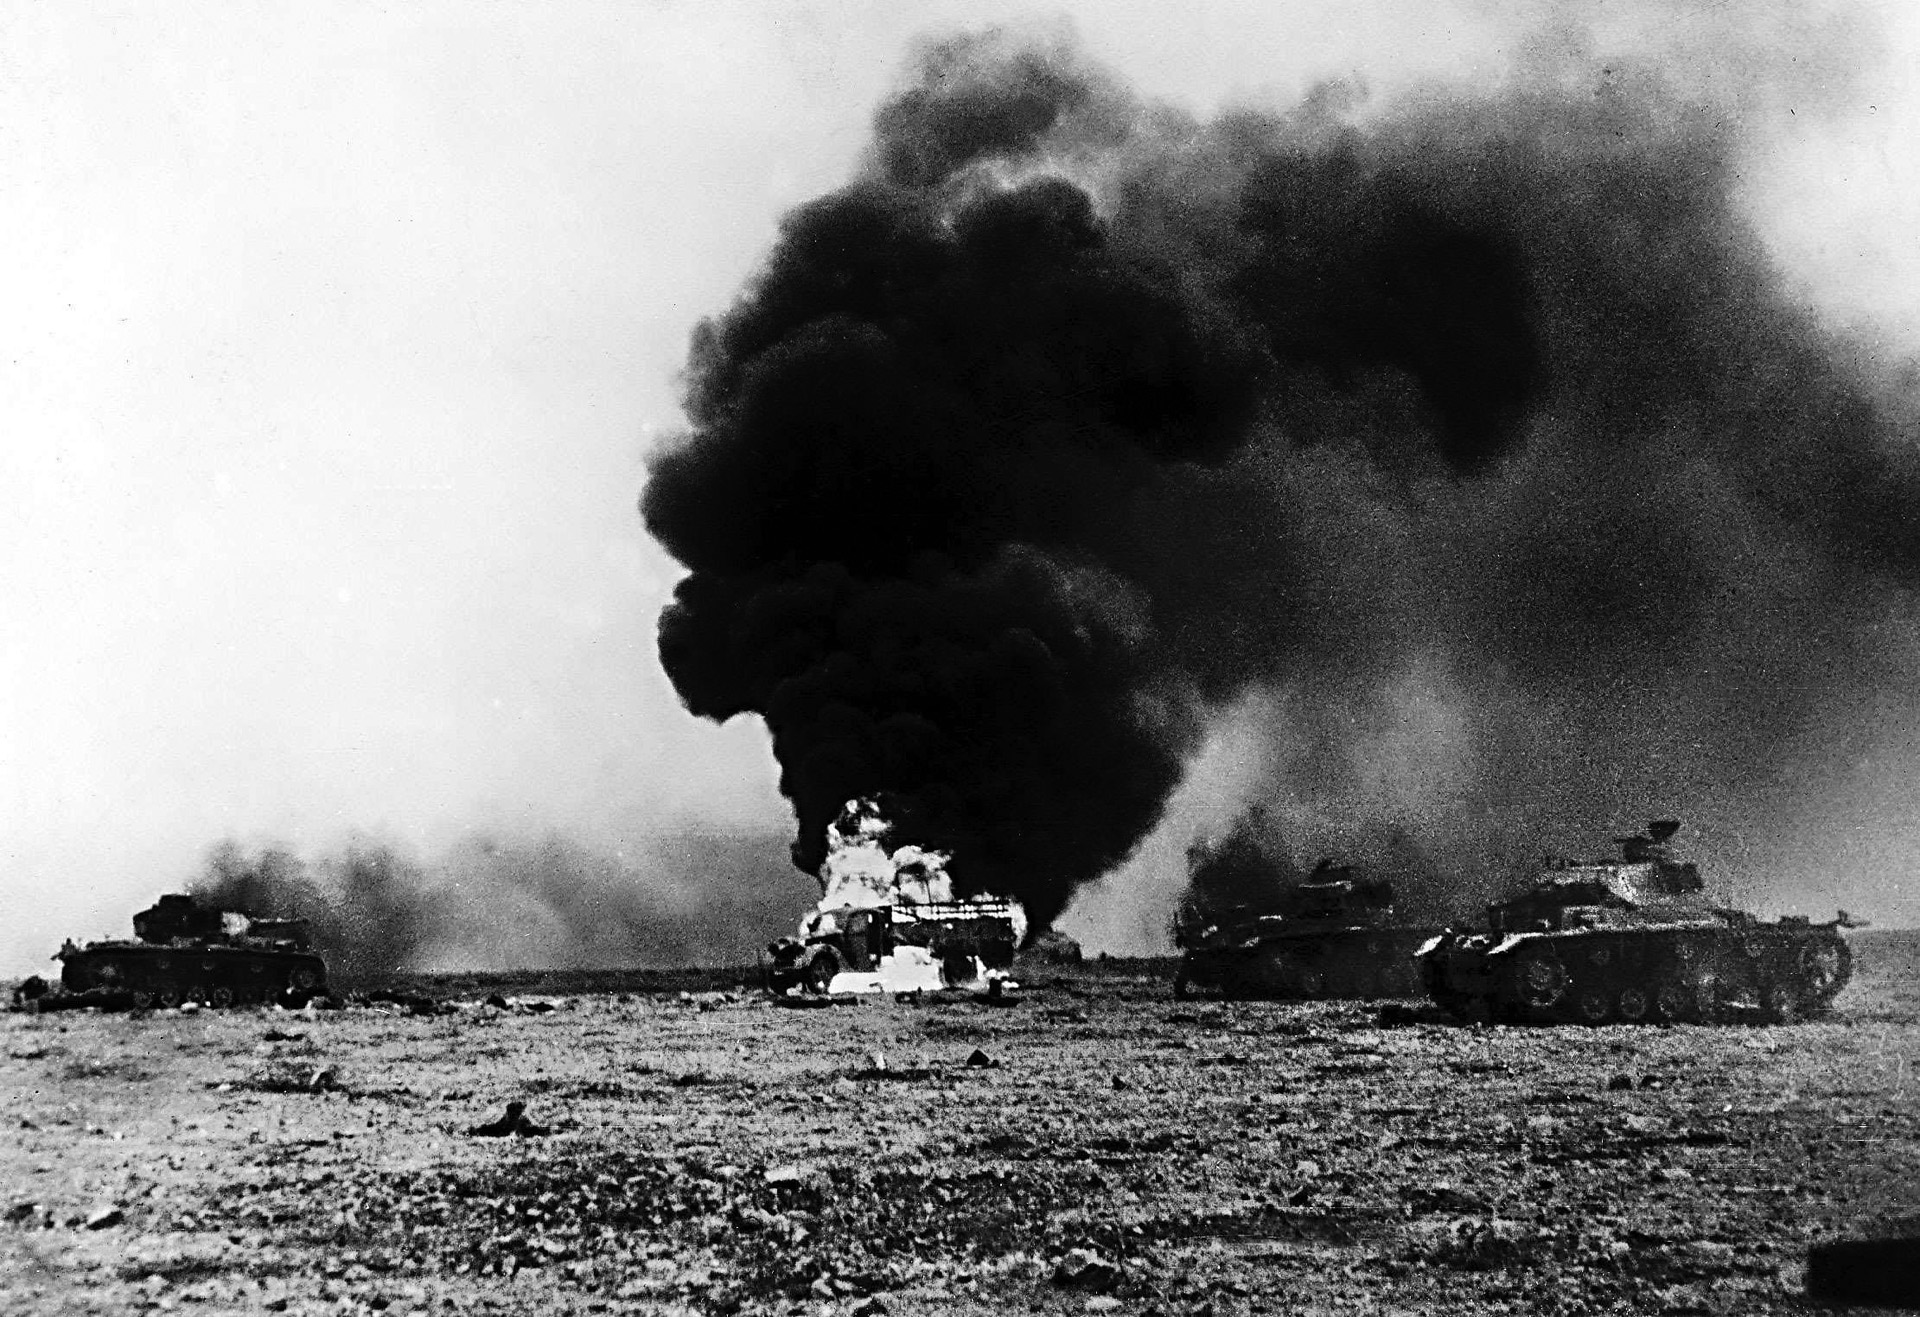 German vehicles, knocked out by South African forces, burn in the Libyan desert, 1941. After North Africa was secured, the South African forces went through a massive reorganization to prepare them for fighting in Italy. 